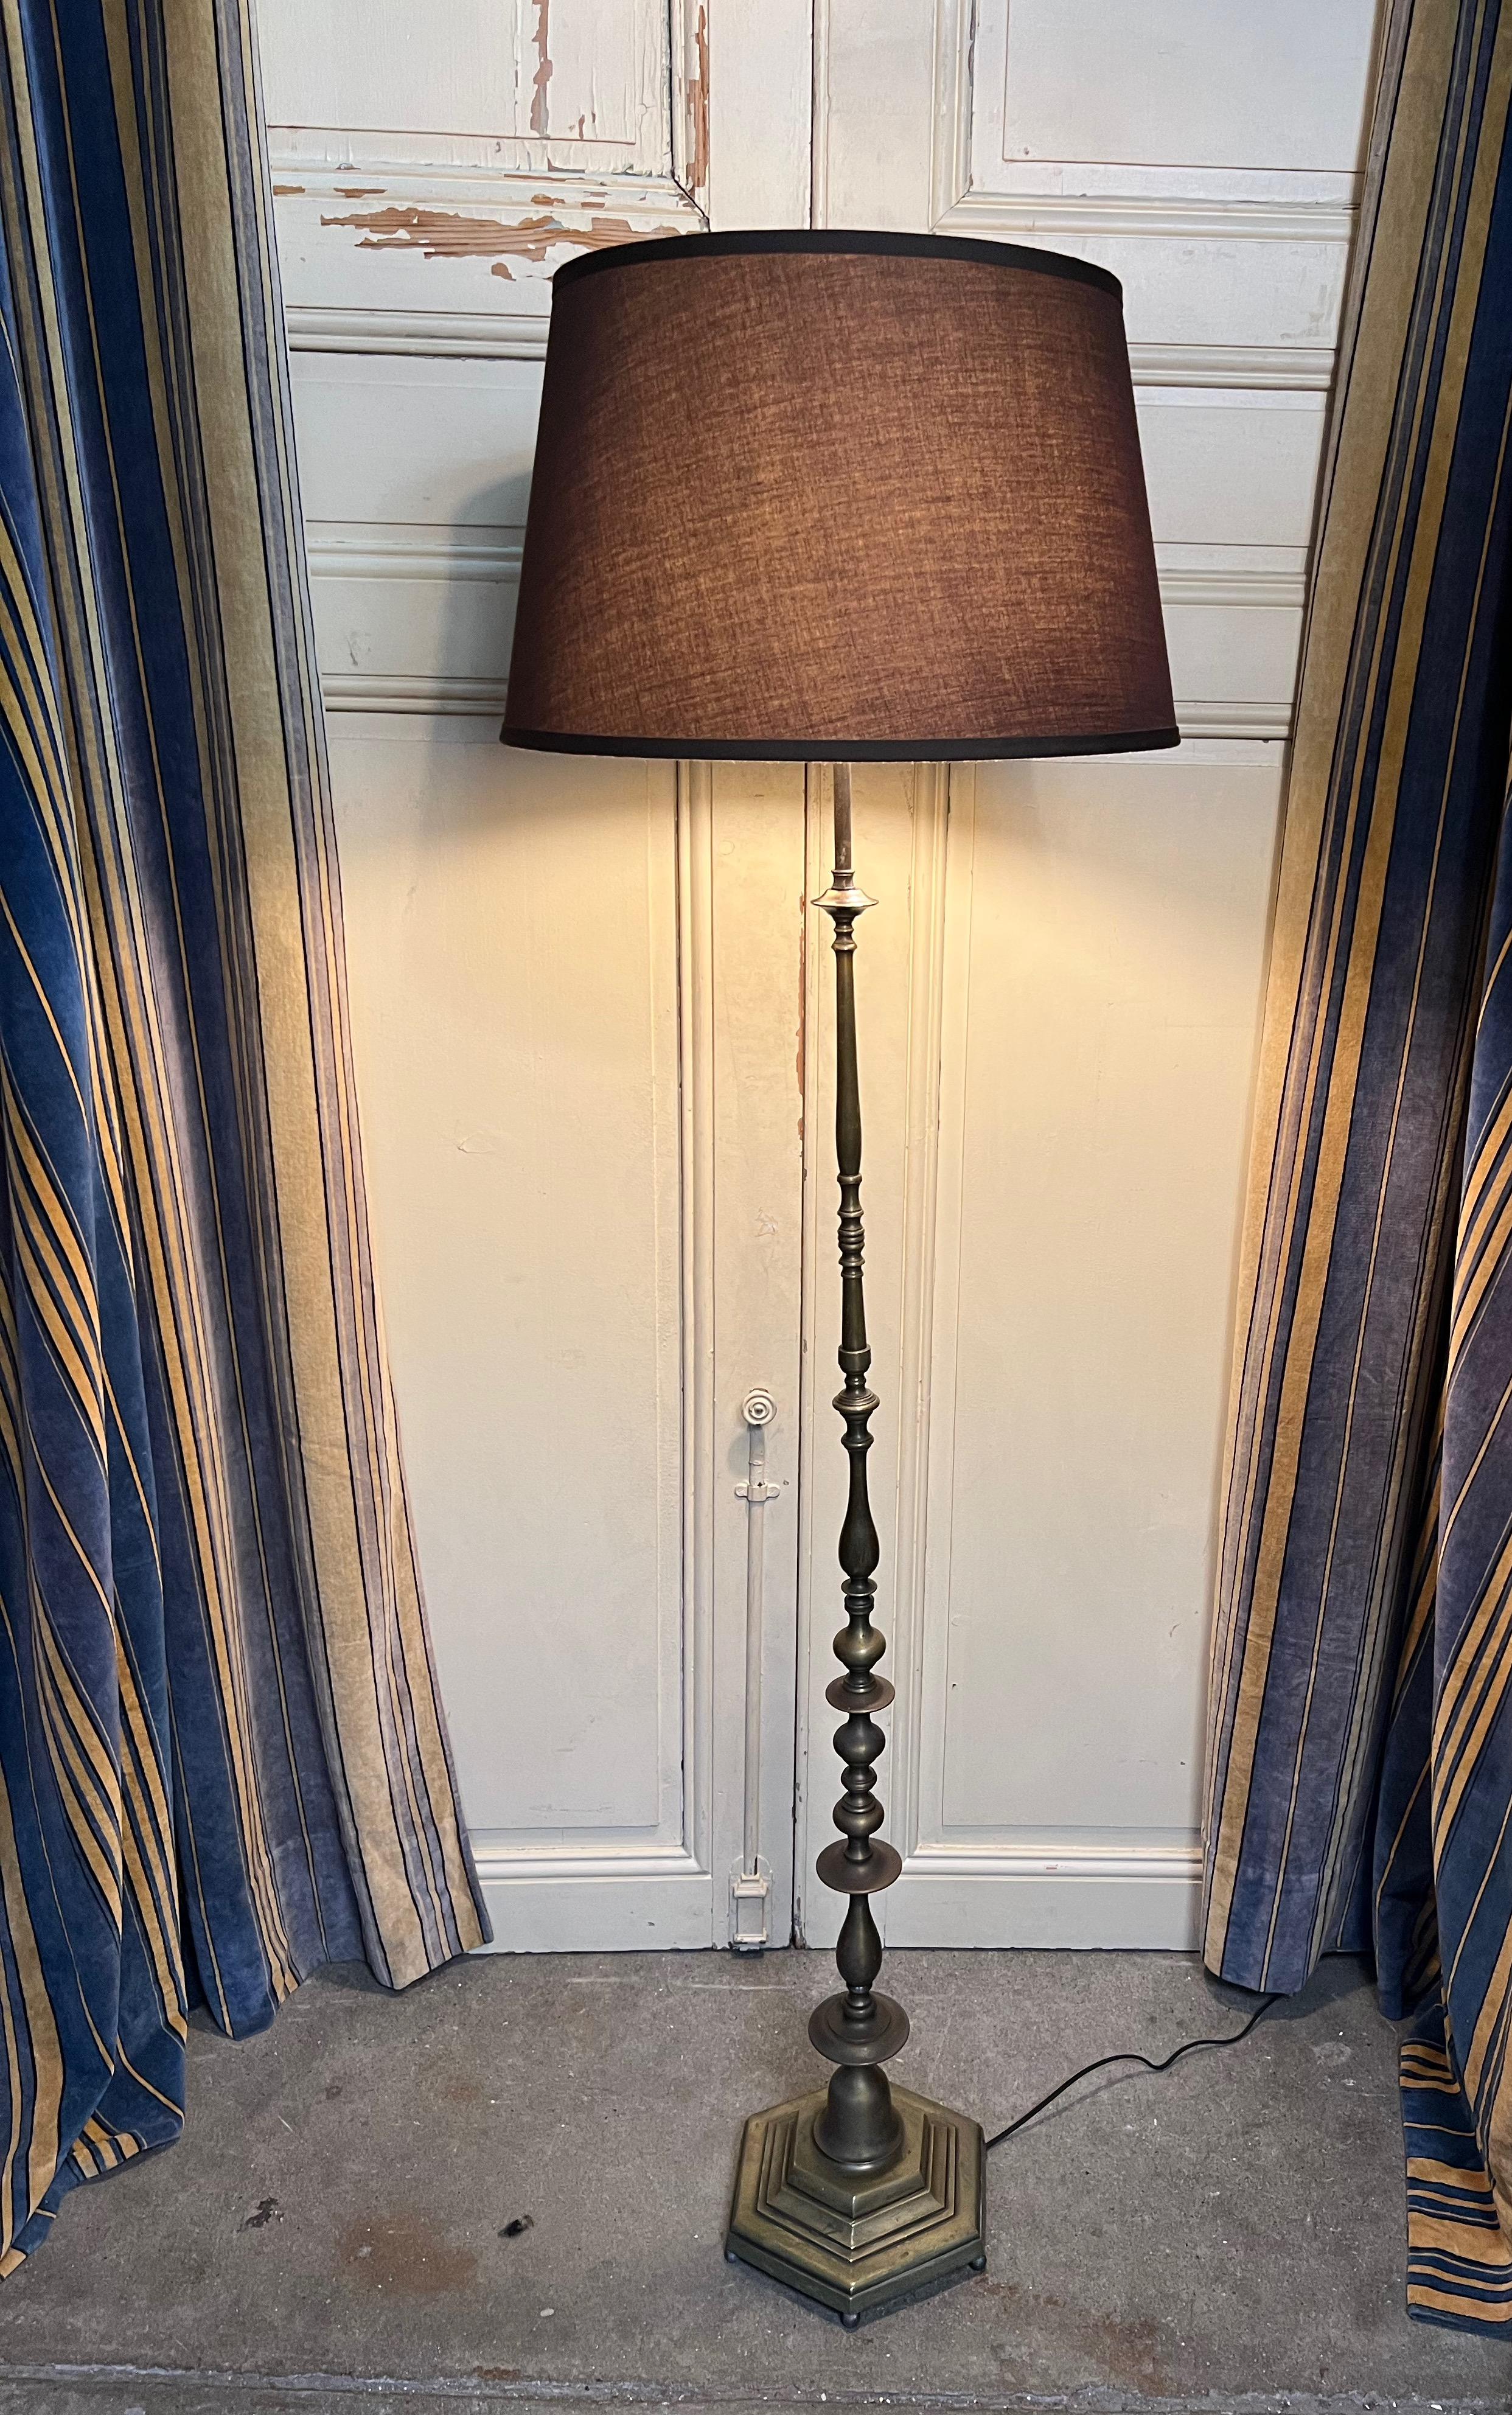 This French 1940s floor lamp features a cast hexagonal base resting on ball feet, providing stability and elegance. The stem is composed of turned and cast bronze pieces that gracefully taper towards the top. The hand-patinated, oil rubbed brass